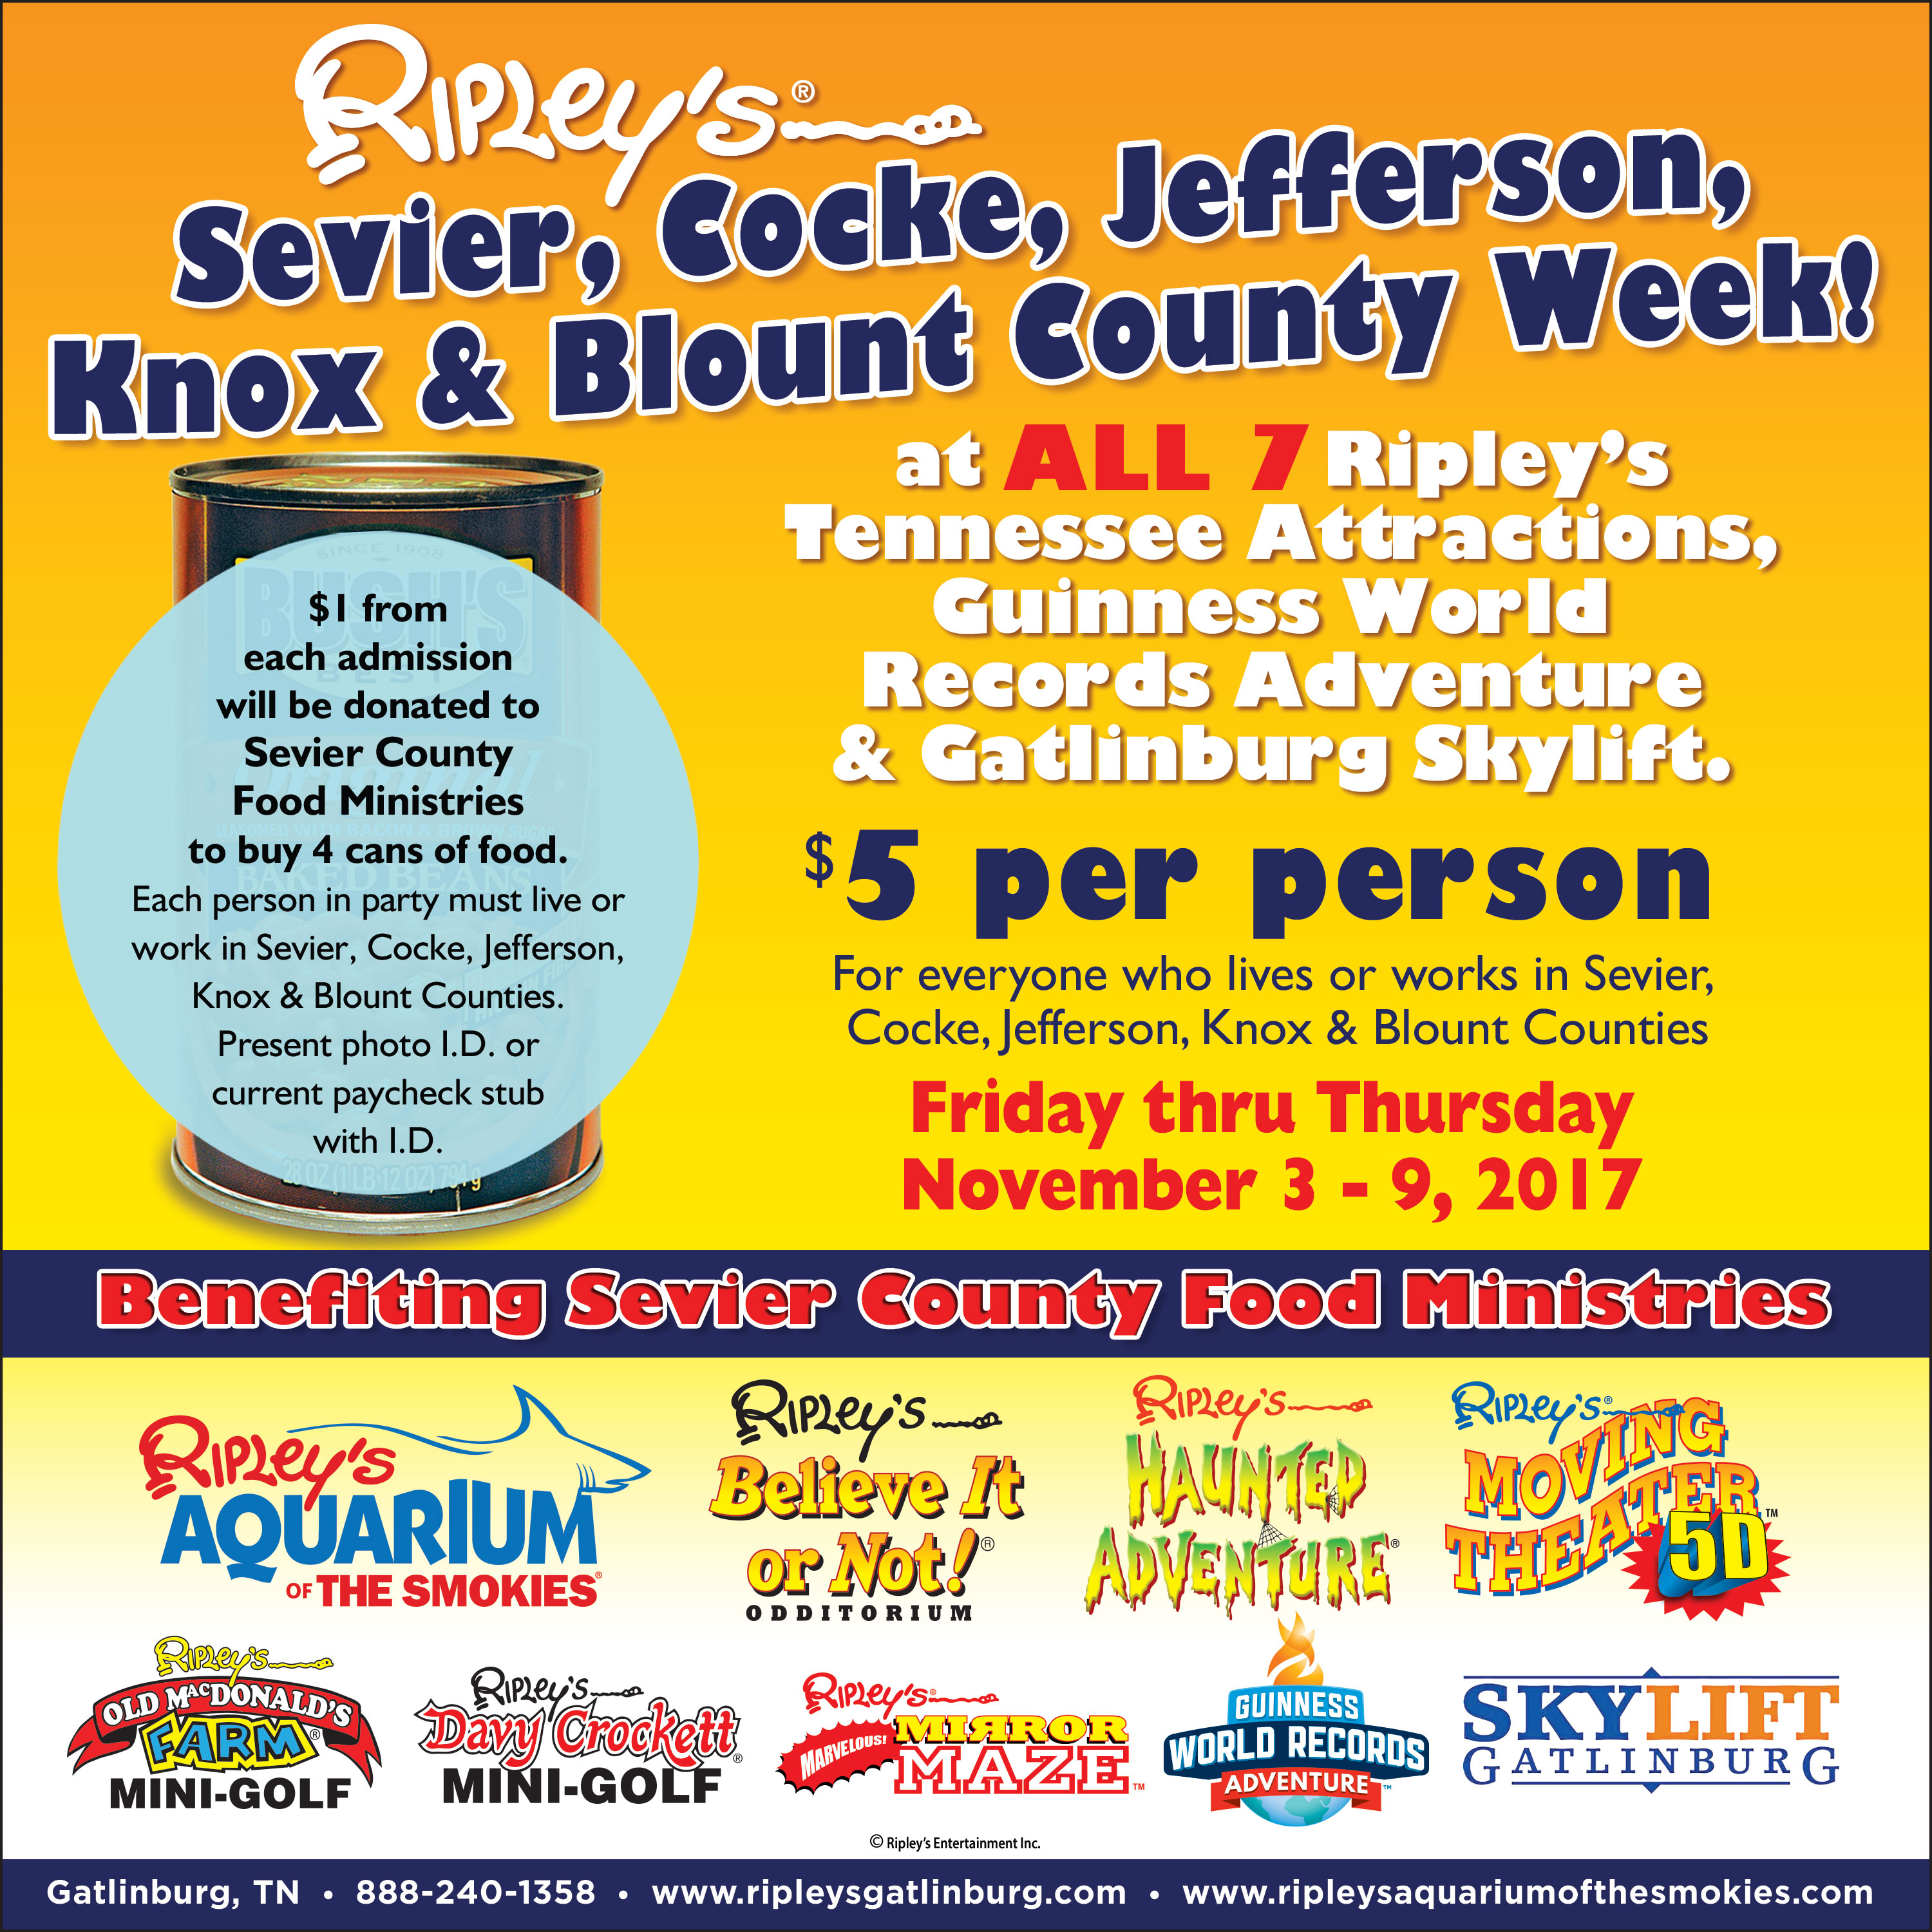 Local Appreciation Days All 7 Ripley's Attractions! Hometown Sevier